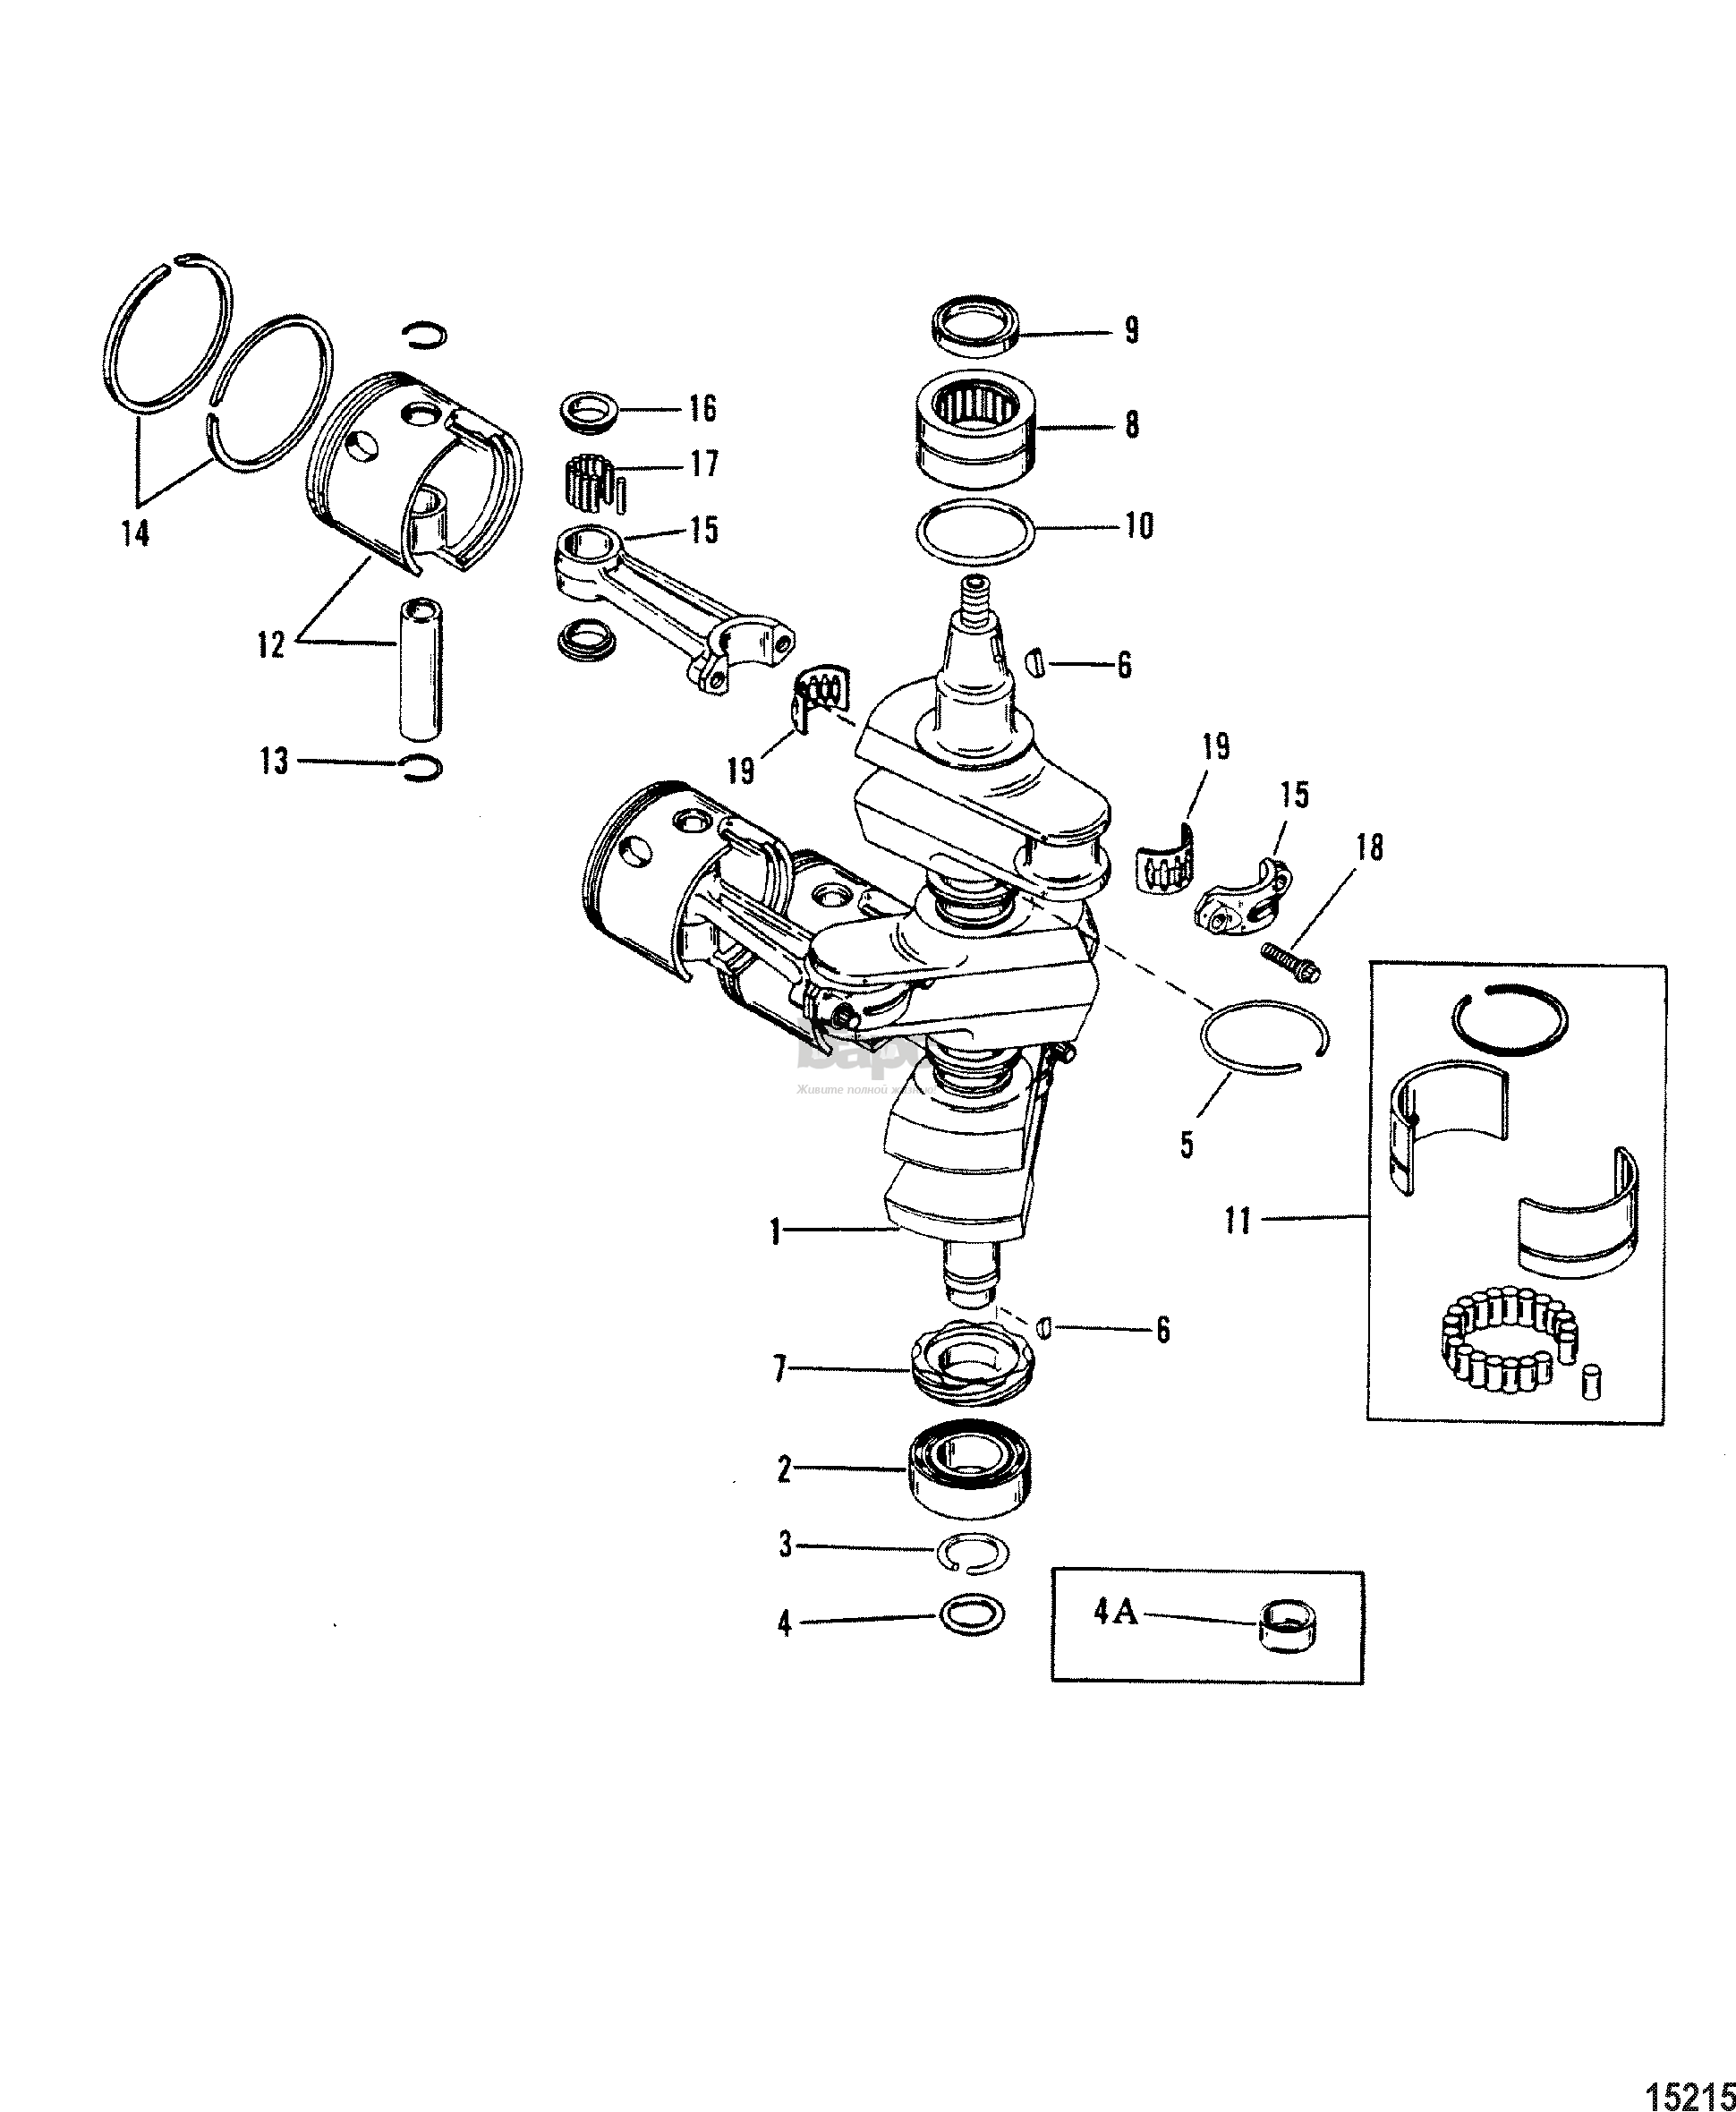 Crankshaft, Pistons And Connecting Rods (#638-8532-1)